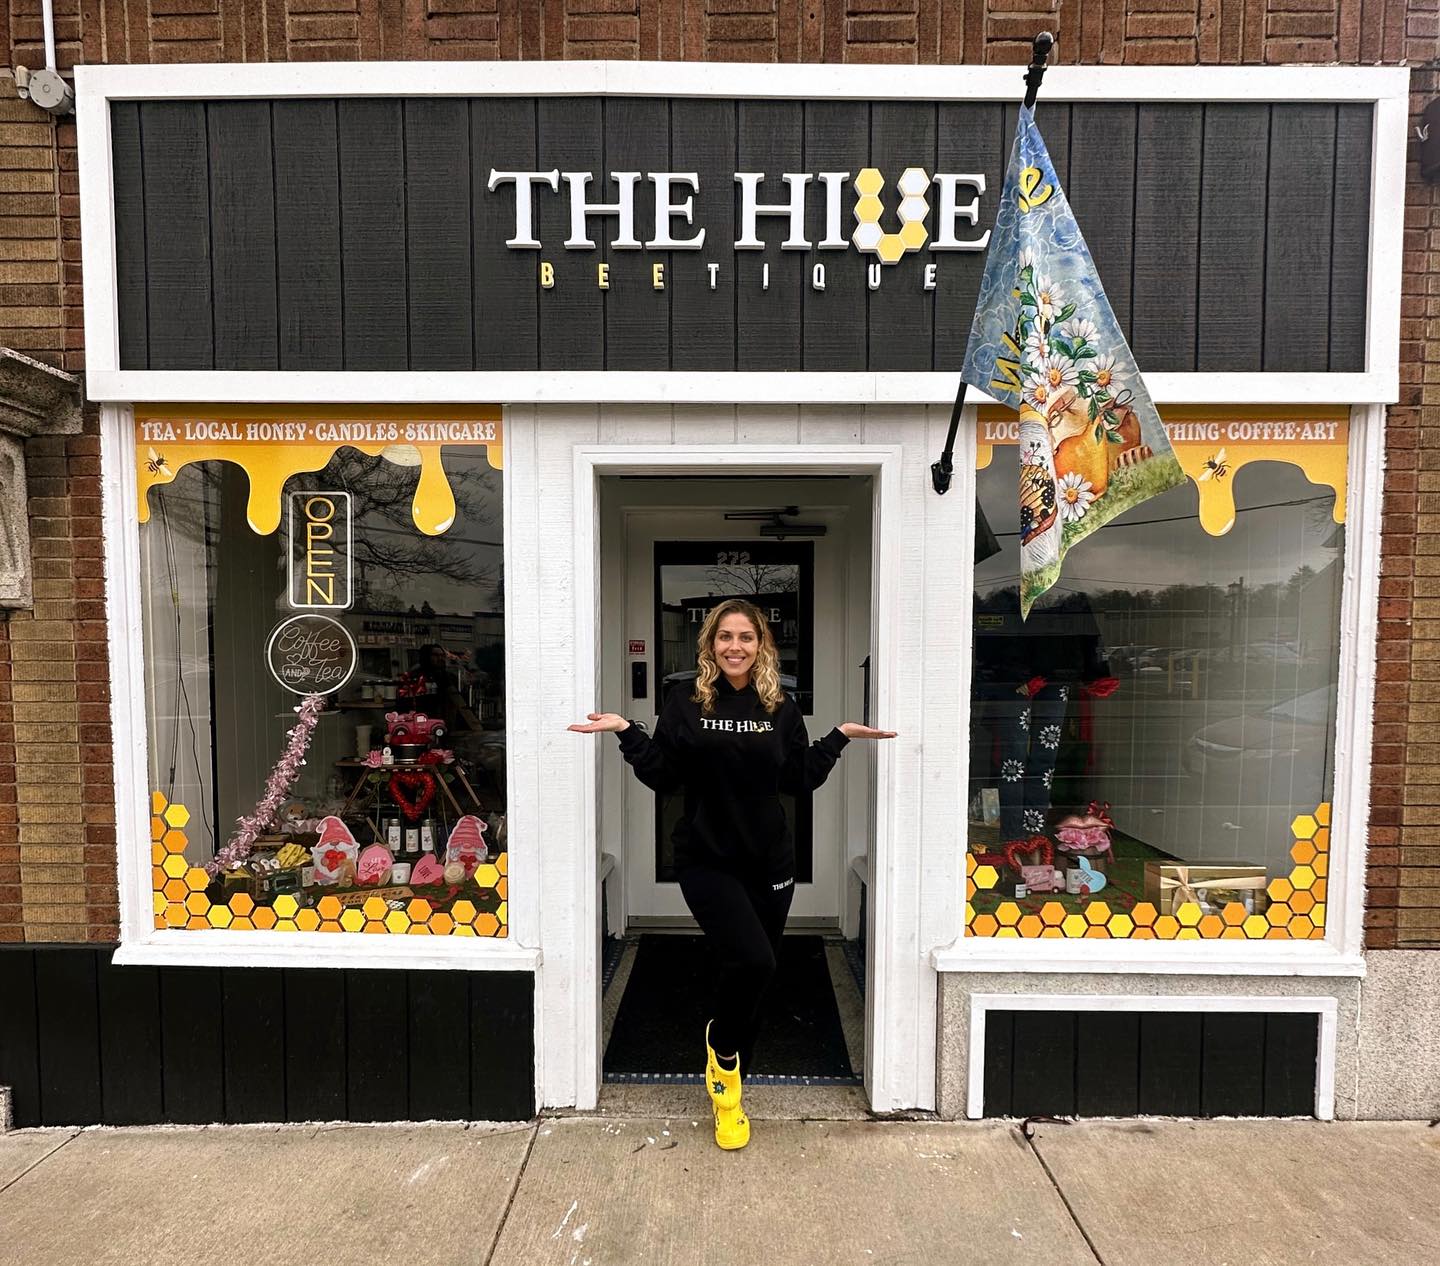 Good afternoon my lovesss☀️ Trust the process and vision 🍯😍 @thehive585 GRAND OPENING celebration TOMORROW❗️

If you’re in the Rochester Ny, Buffalo, Syracuse area… 
🐝 BUZZ BY 
272 N. Winton Rd. 
Rochester, NY 14610
10am-8pm
🤗 

Shop our Sweet Collection of Local and Specially Curated Goods ❗️

@legendofthebeans will be brewing coffee ☕️ & lattes for order and will have a selection of white and red wine 🍷 as well as espresso beer 🍻 3pm-8pm❗️

Our neighbors @regimesmoke will offer 20% off storewide all day ❗️

We have amazing custom cookies to giveaway thanks to @rocincookiemomsters 😍

Our friends @createpizza585 will be providing delicious pizzas around dinner with @hintofher sweet heat hot honey 🍕 🌶️🍯 ❗️ 

@roccityballoons will be decorating the front of the store with a beautiful ballon garland 🎈 

Shop these amazing brands. We have NEW arrivals in store⤵️
@hintofher @reyes_collective @madebymav_ @zafirocandles @hangloosecreations @partyofhive @crazedcandles @noblamco + more🤗

#thehive585 #rochesterny #585 #grandopening #hintofher #reyescollective #nowopen #shoplocal #supportsmallbusiness #northwintonvillage